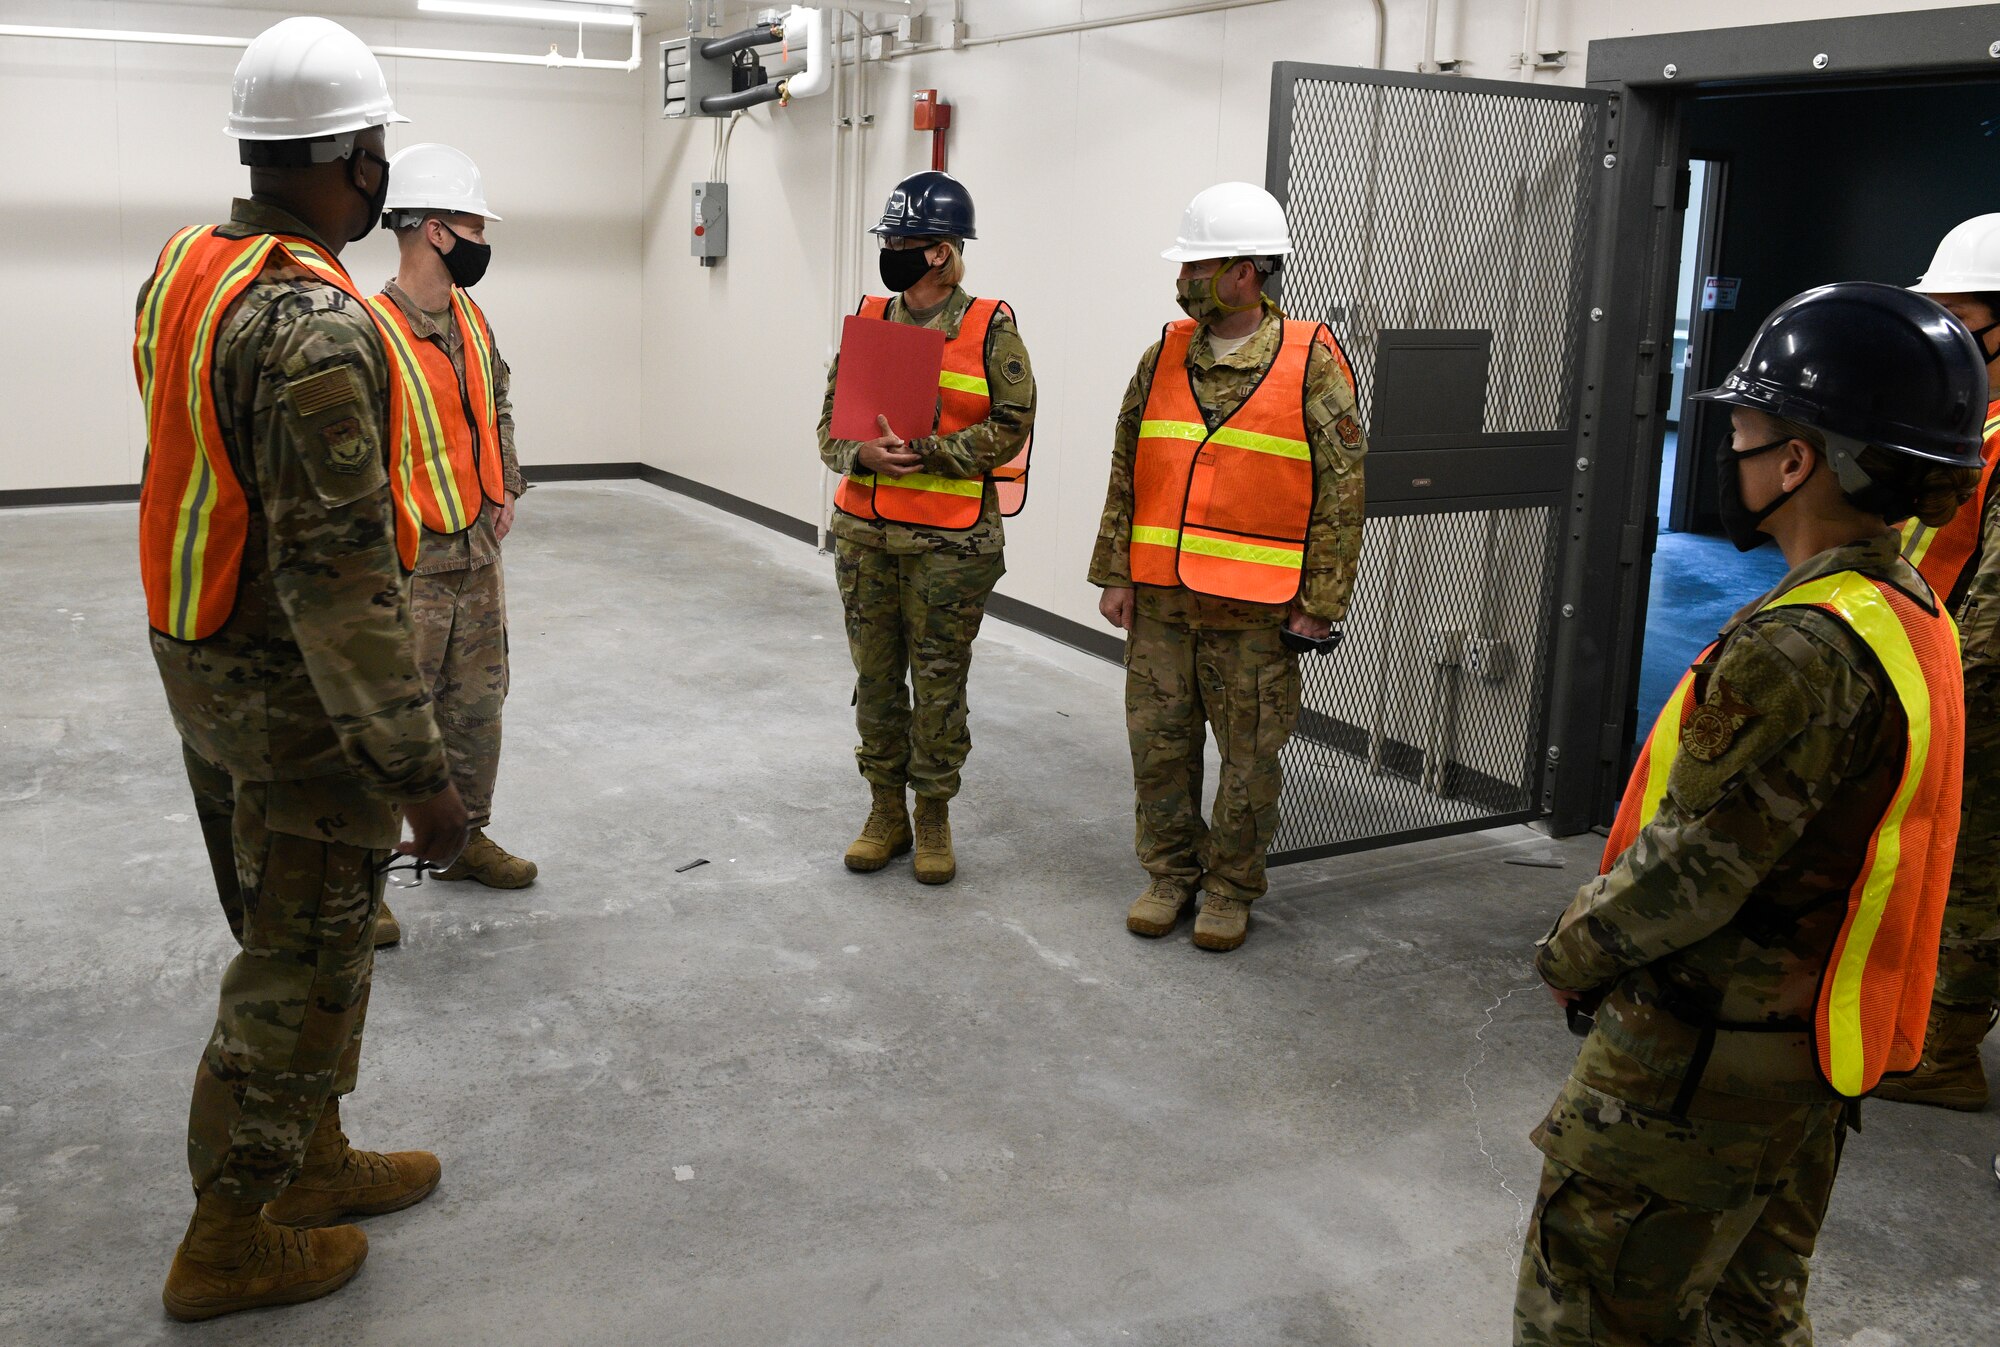 Col. Jennifer Reeves, 341st Missile Wing commander, tours the new Tactical Response Force/Helicopter Operations Alert Facility during a ribbon-cutting ceremony Aug. 4, 2020, at Malmstrom Air Force Base, Mont.